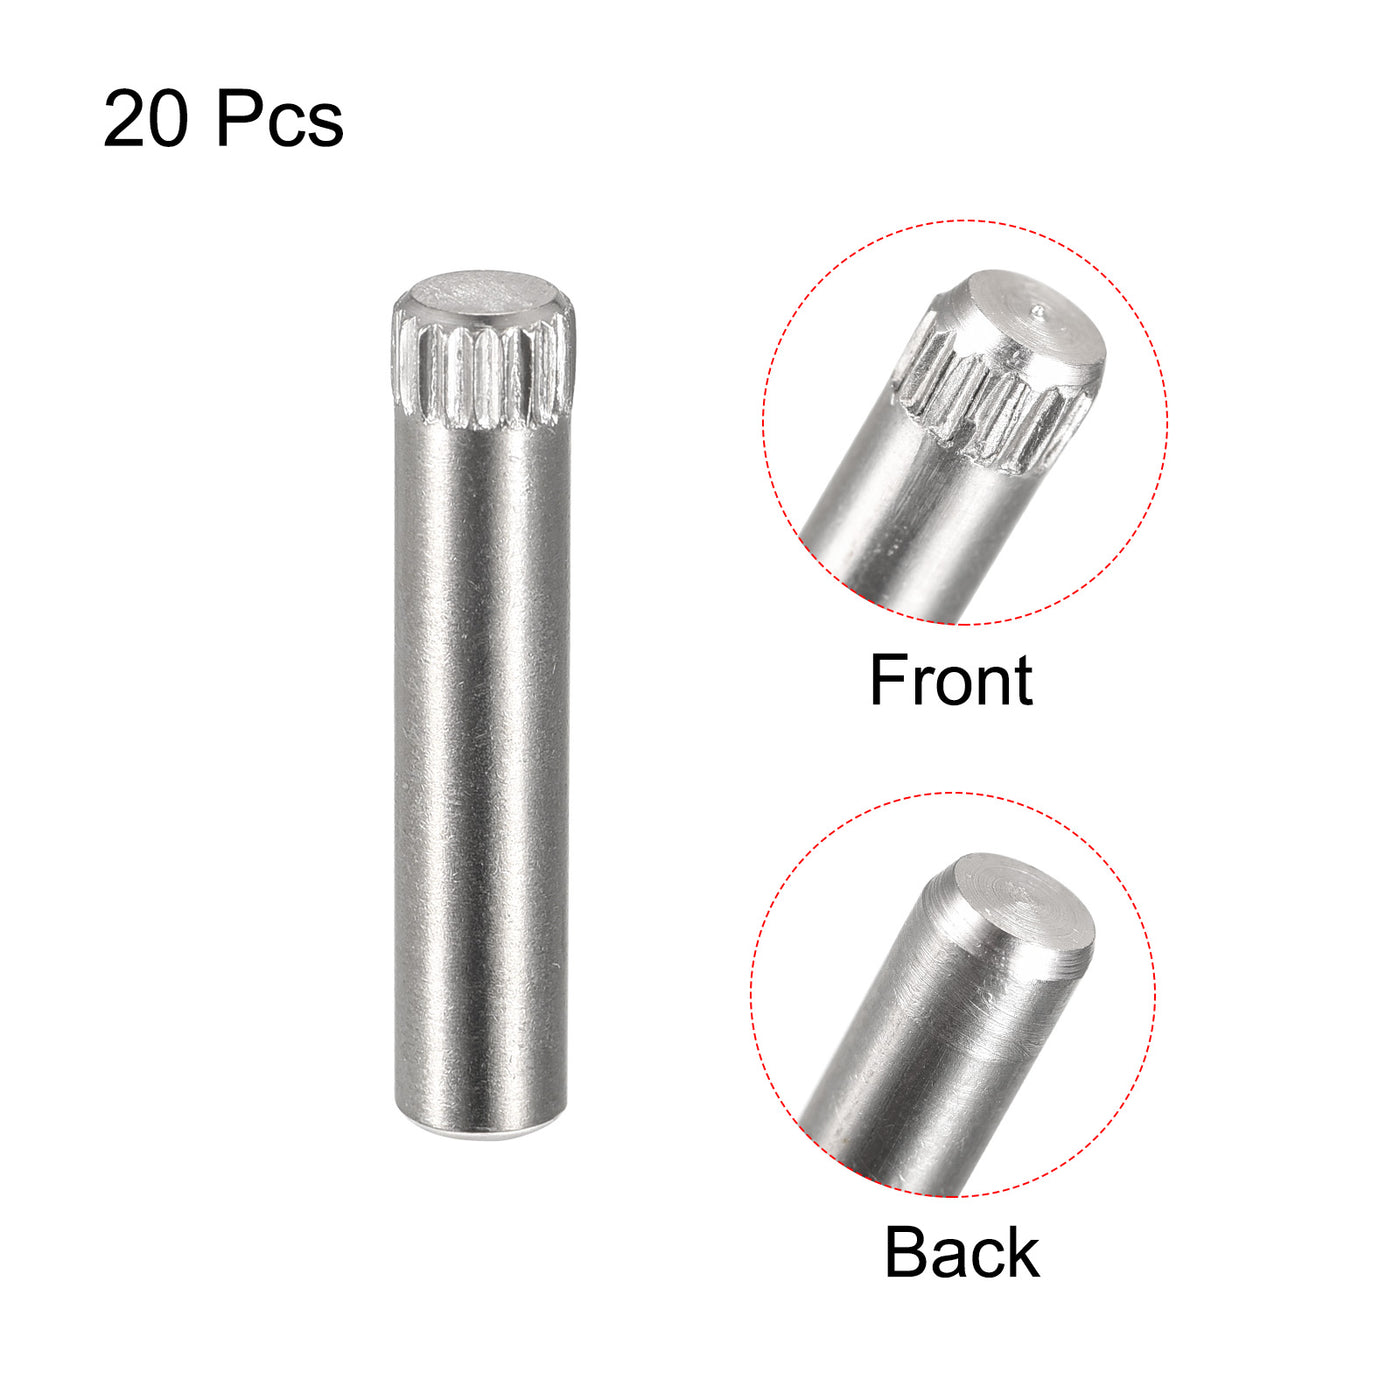 uxcell Uxcell 5x25mm 304 Stainless Steel Dowel Pins, 20Pcs Knurled Head Flat End Dowel Pin